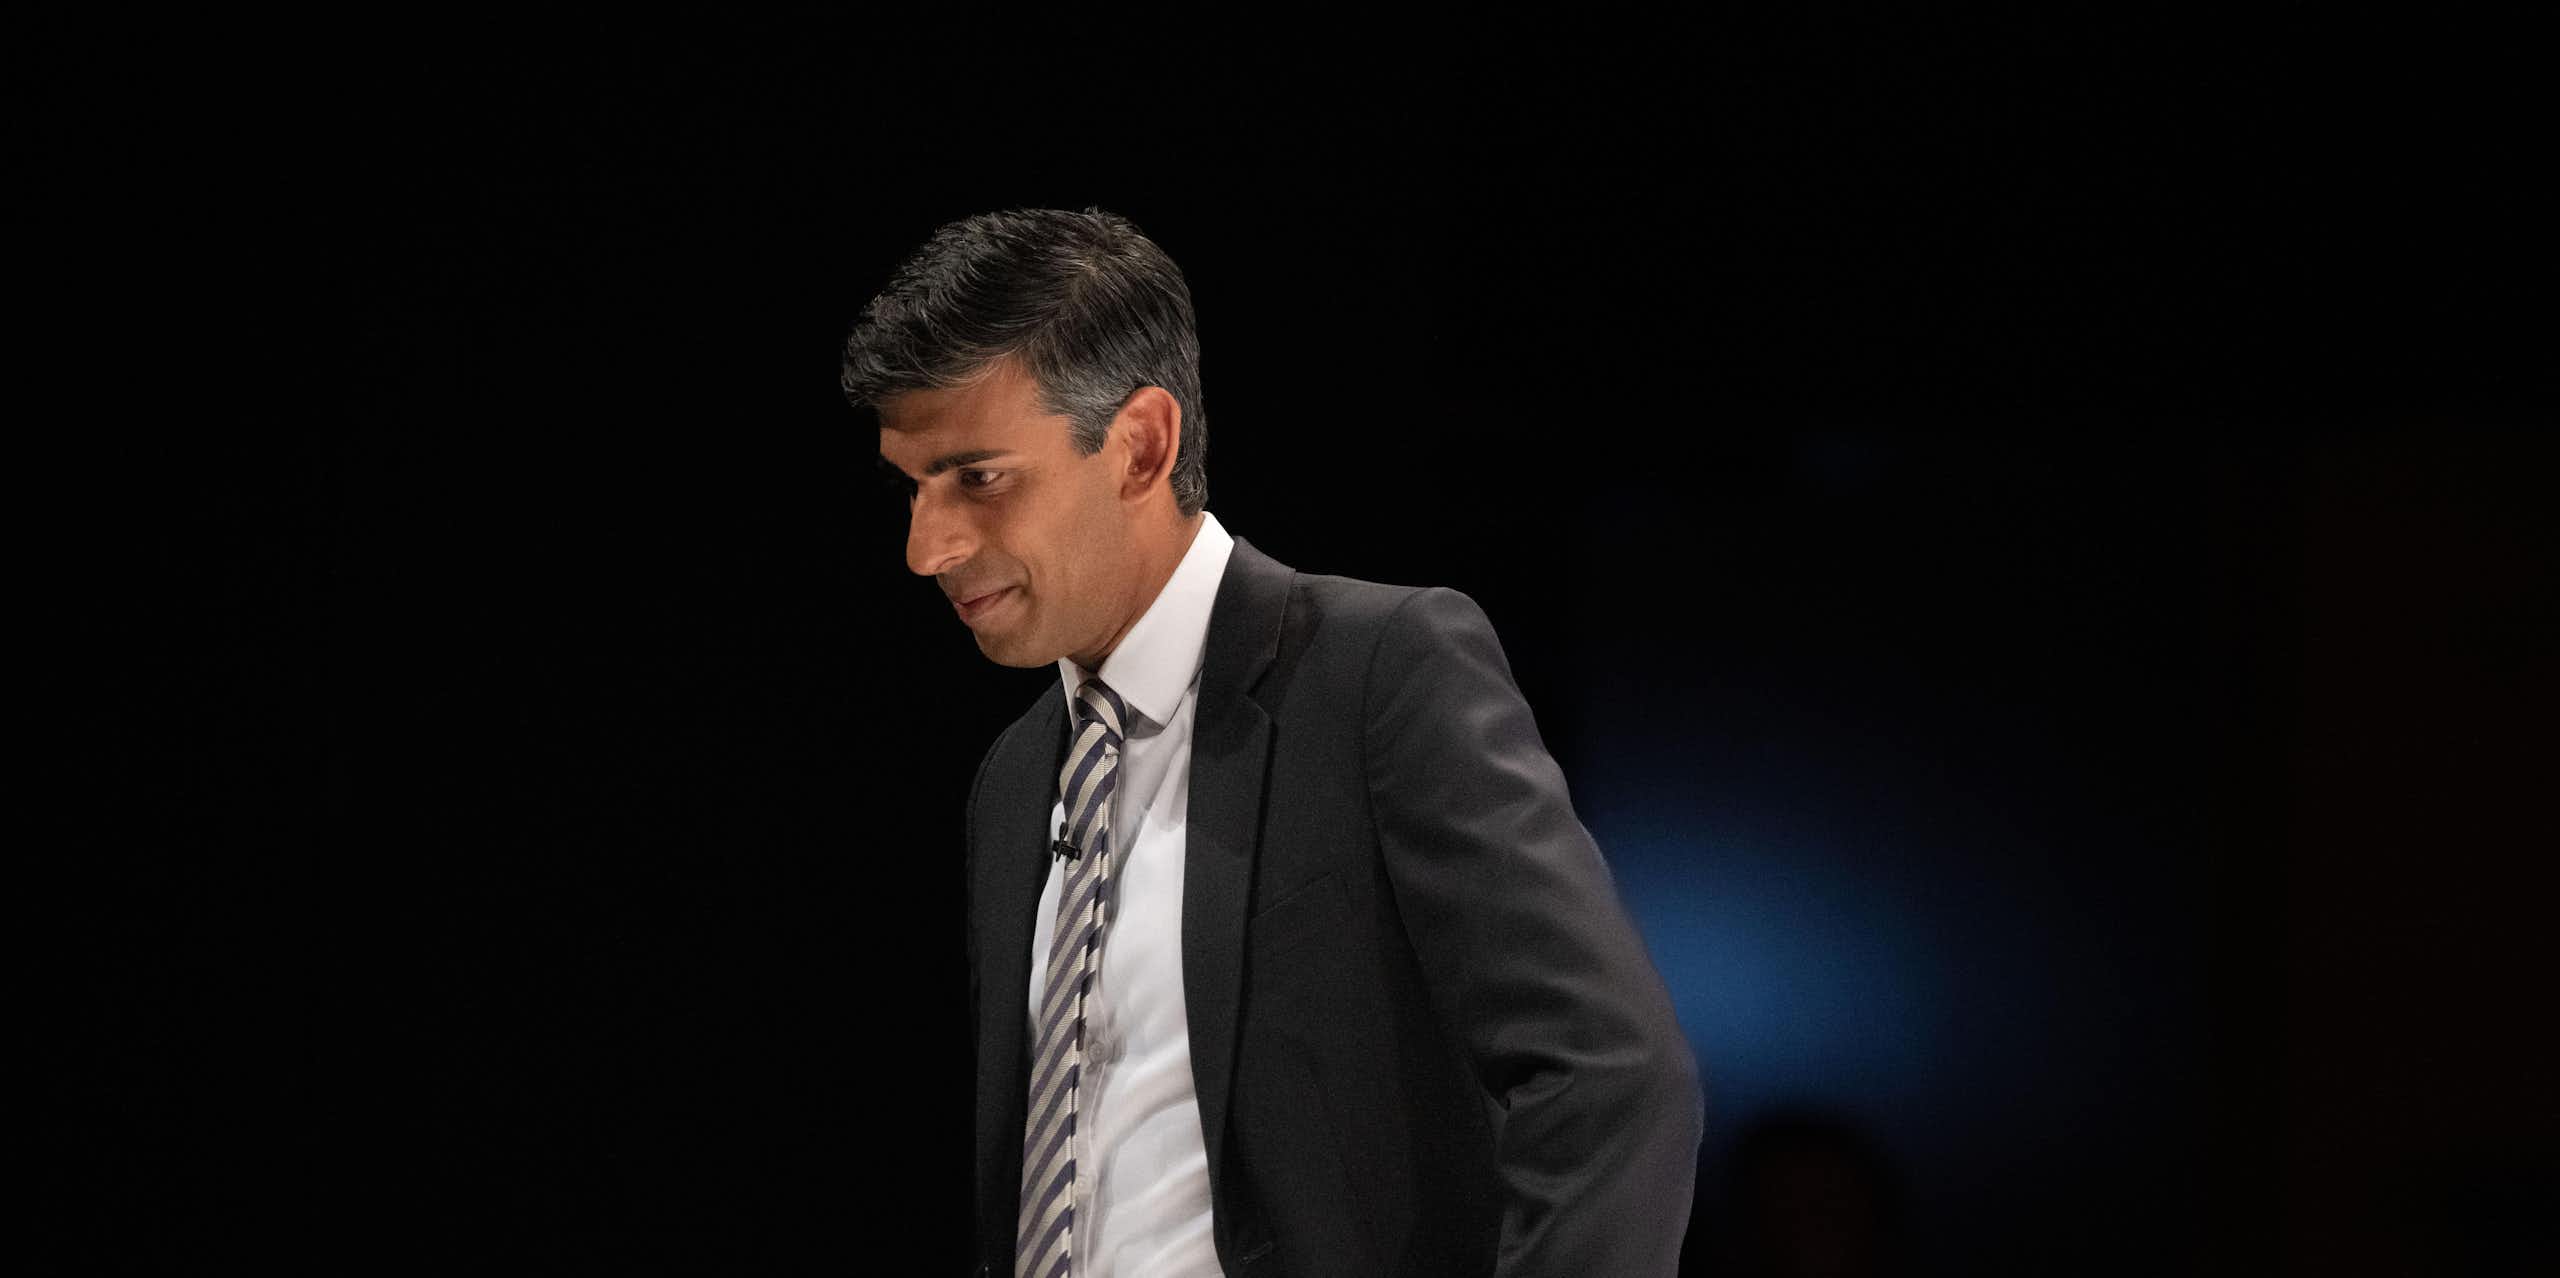 Rishi Sunak in a suit against a dark background, looking down with his hand on his hip